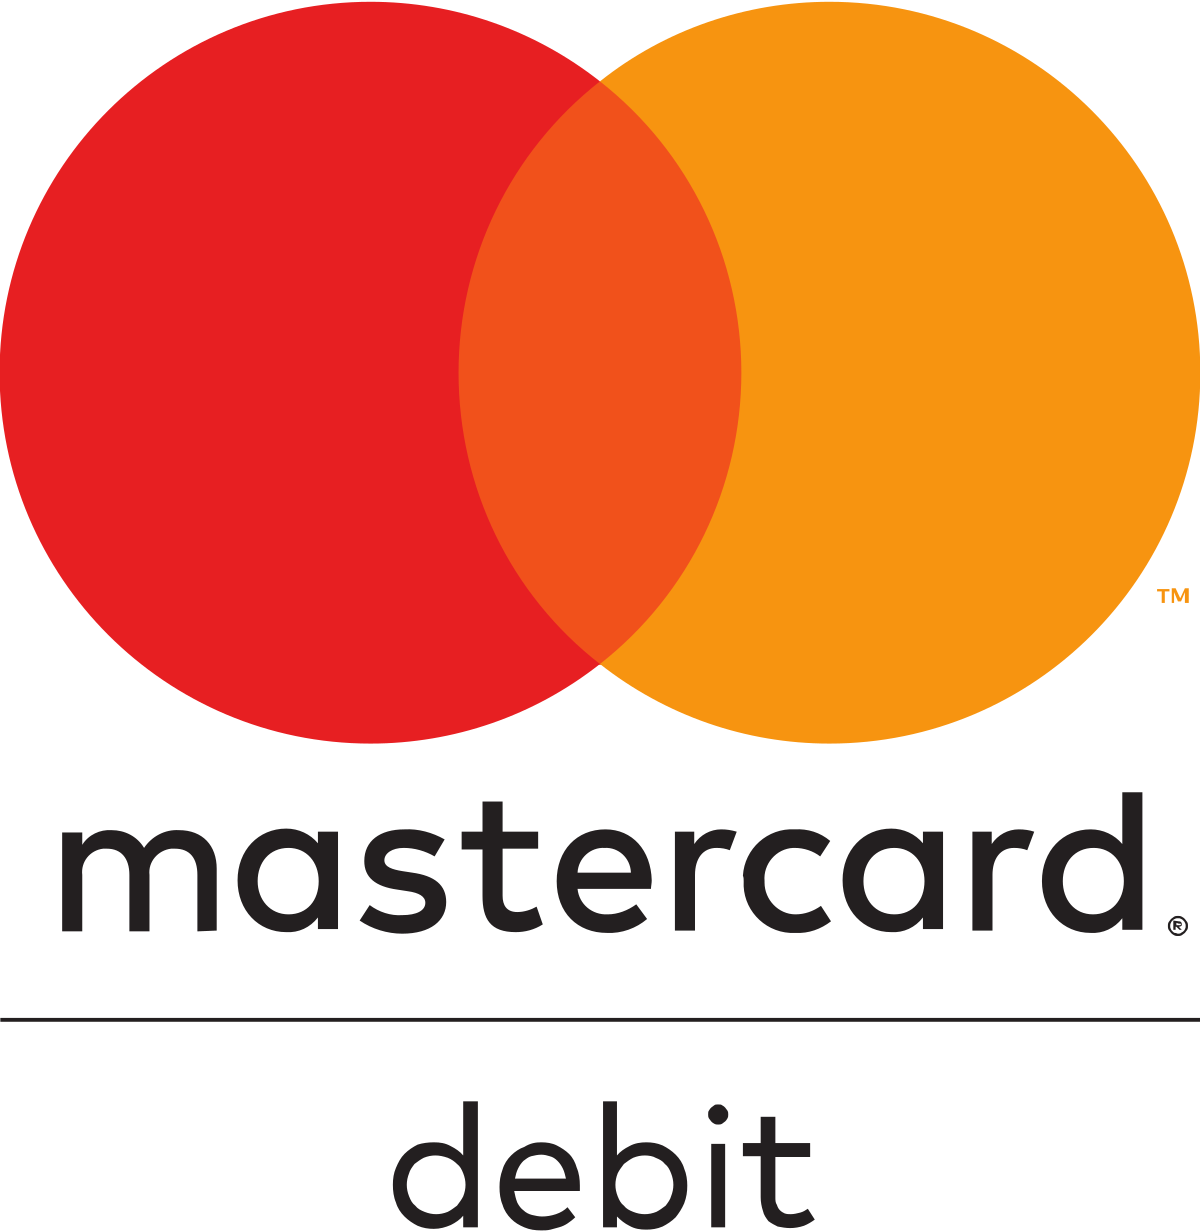 A Logo Of A Credit Card